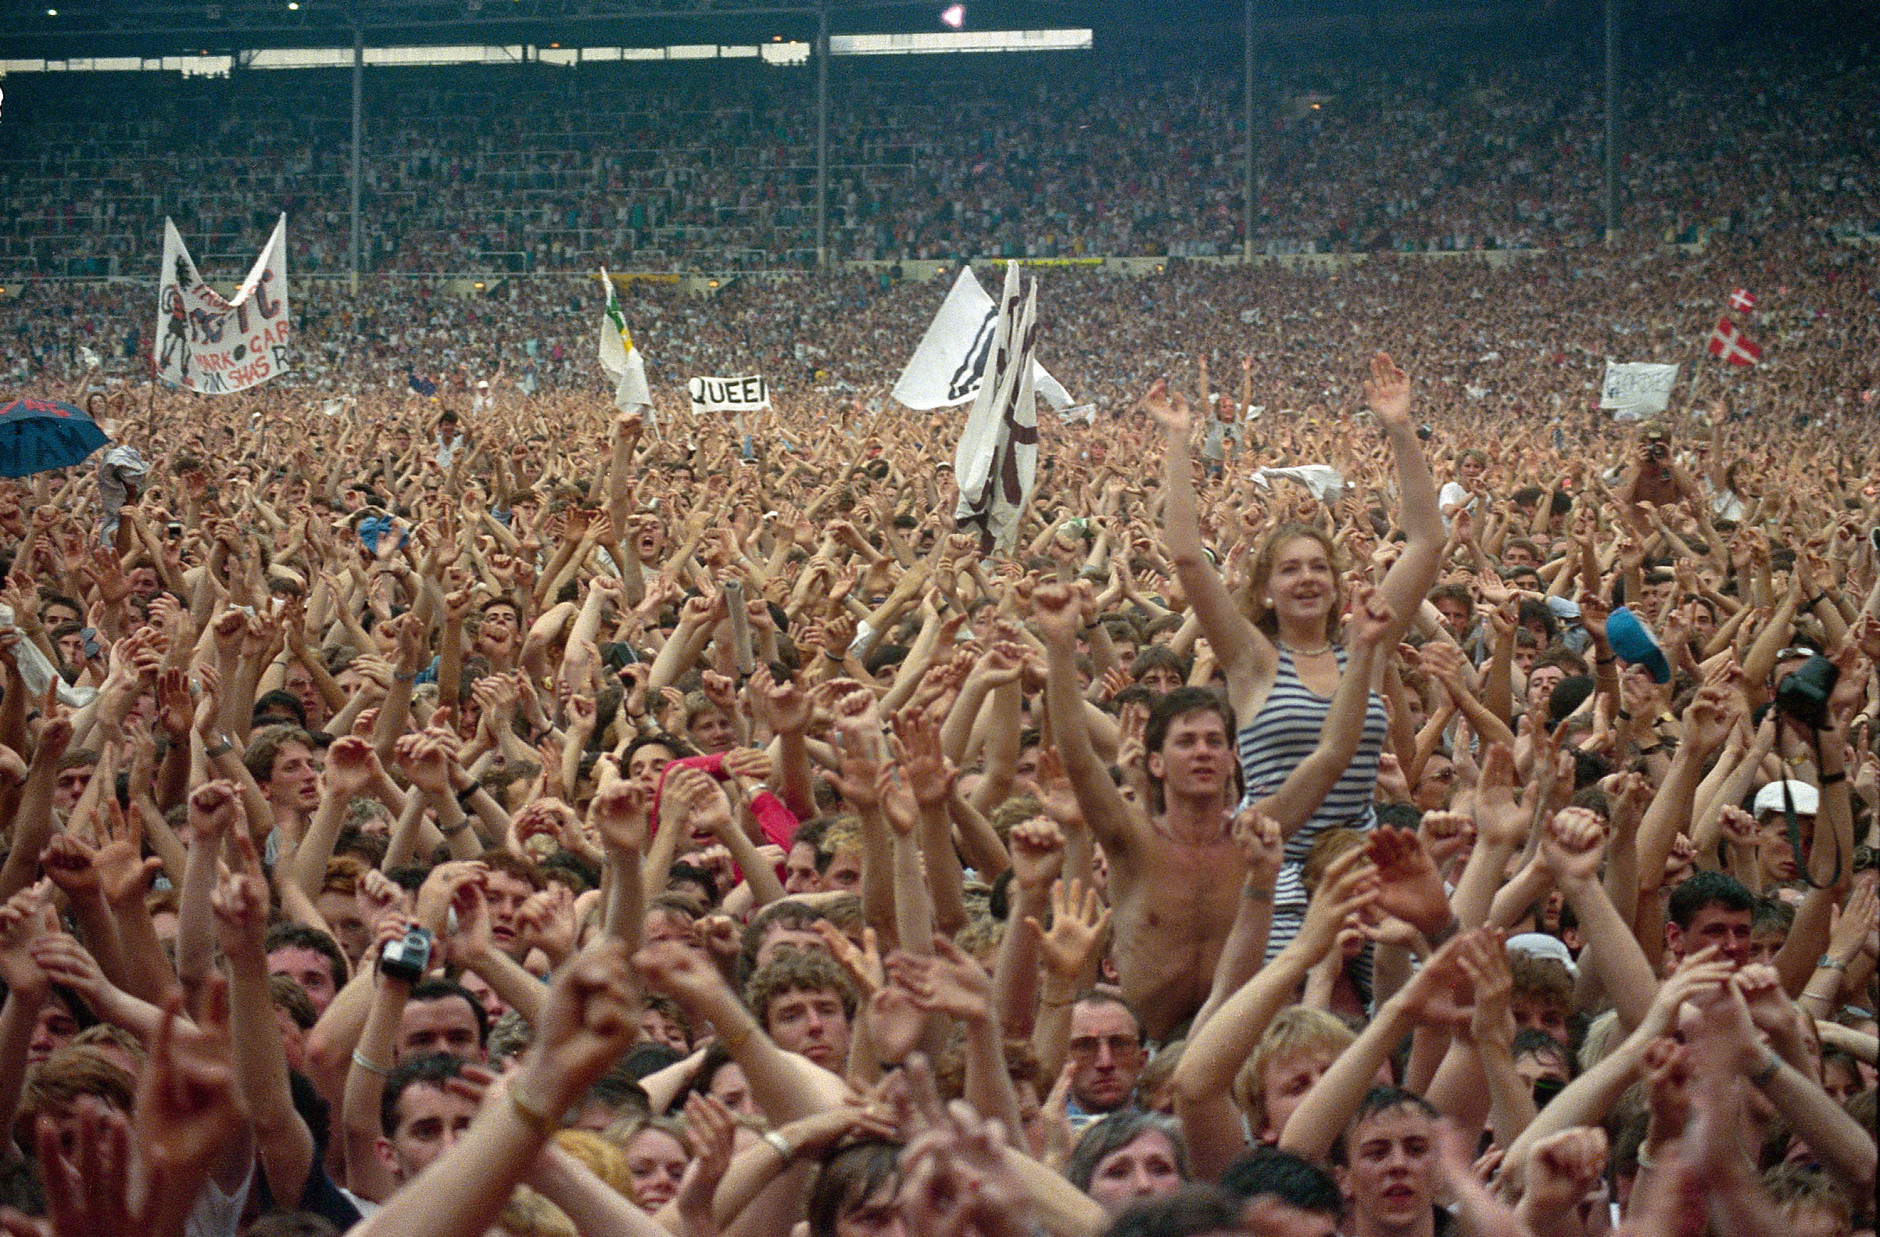 Crowd cheers during Live Aid famine relief concert at Wembley Stadium in London, England July 13, 1985 (AP Photo)